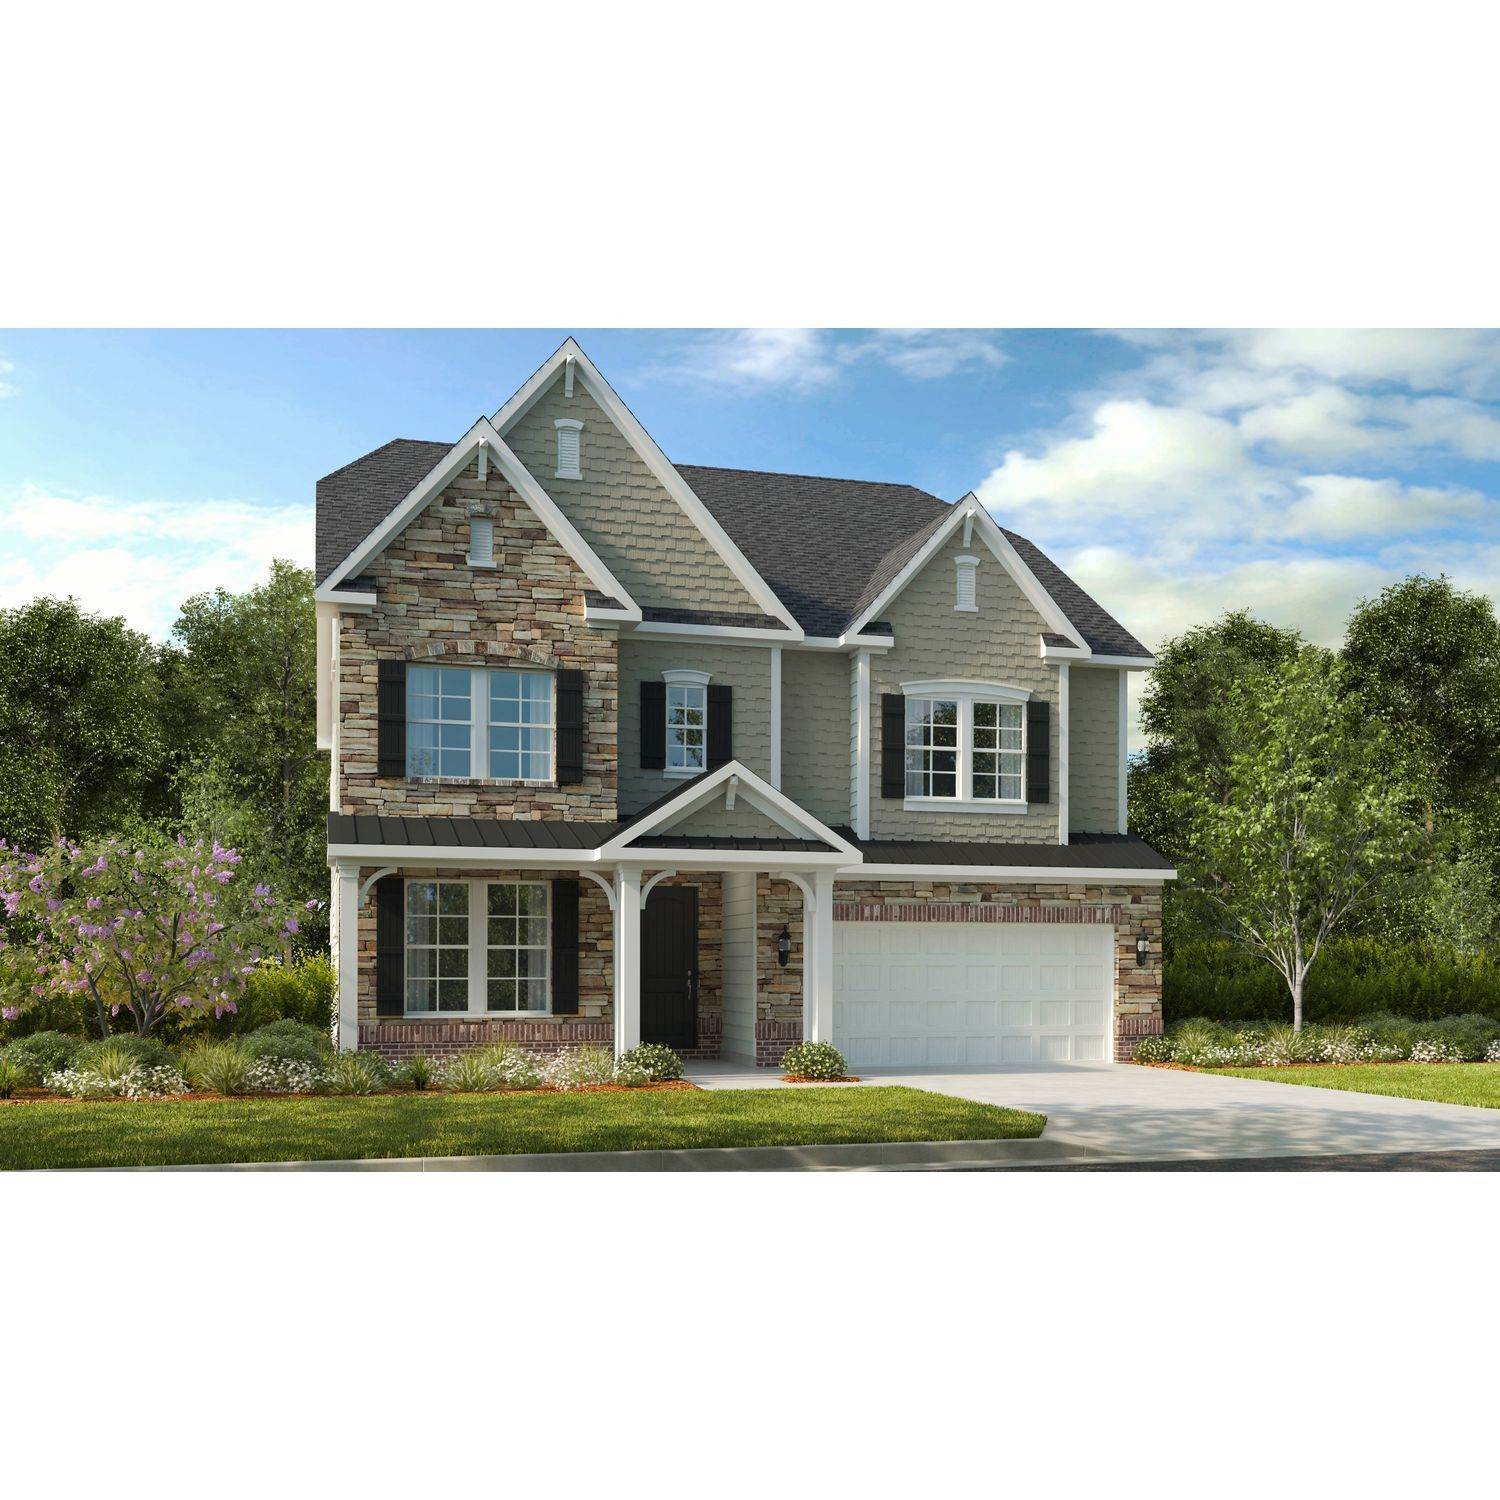 Single Family for Sale at Huntersville, NC 28078